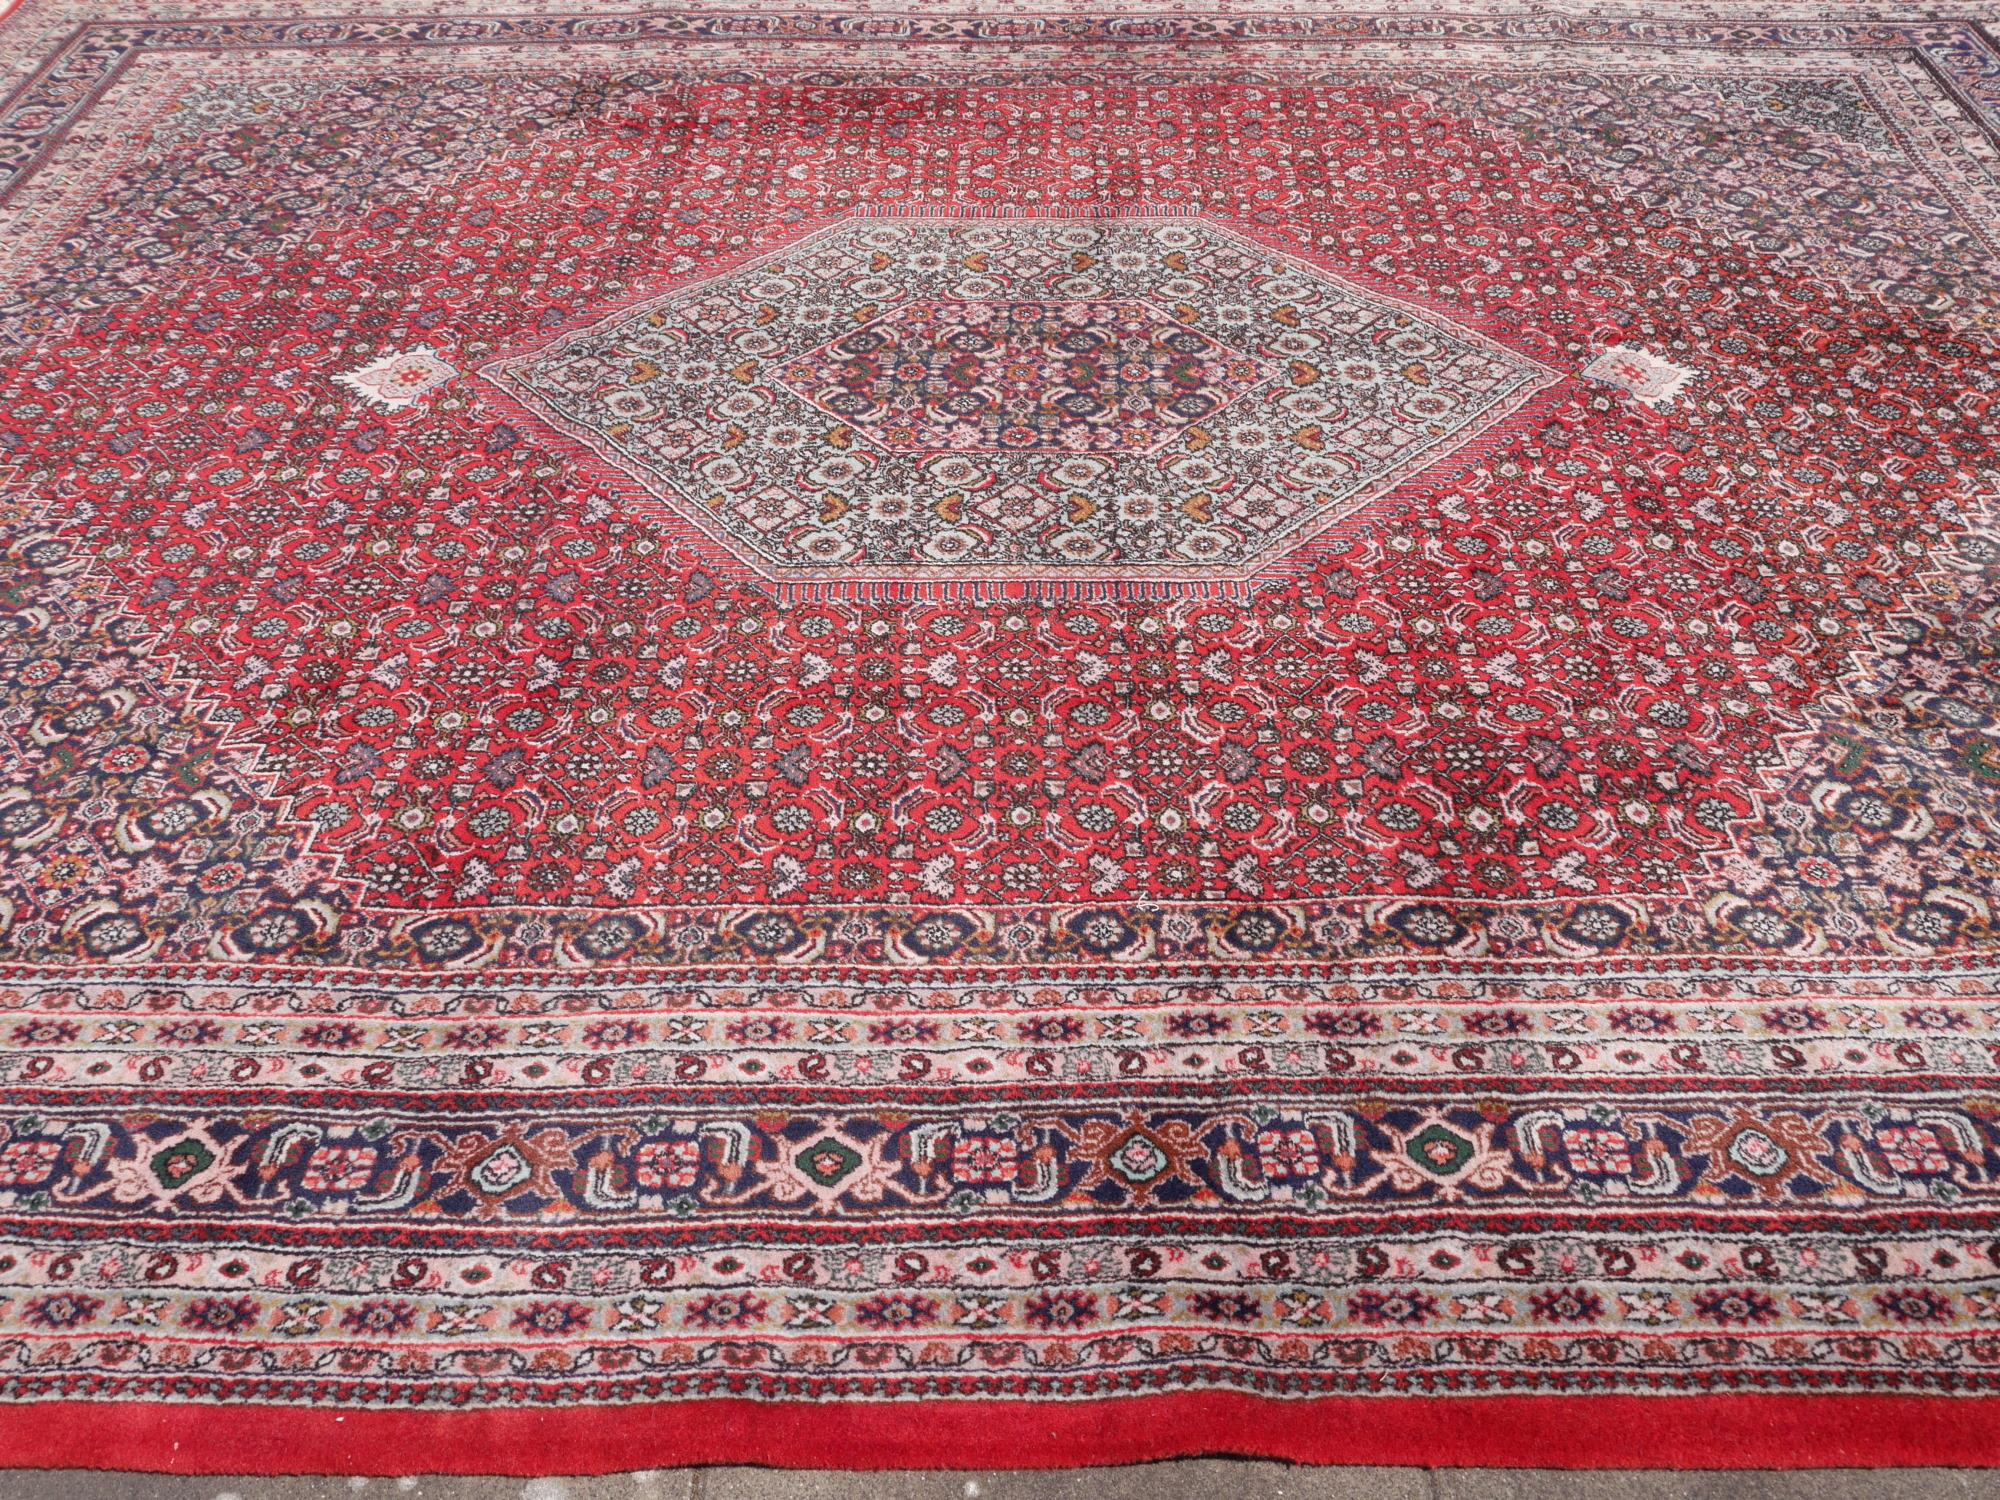 Late 20th Century Bidjar Rug Oriental Vintage Hand-Knotted Persian Design Made in India For Sale